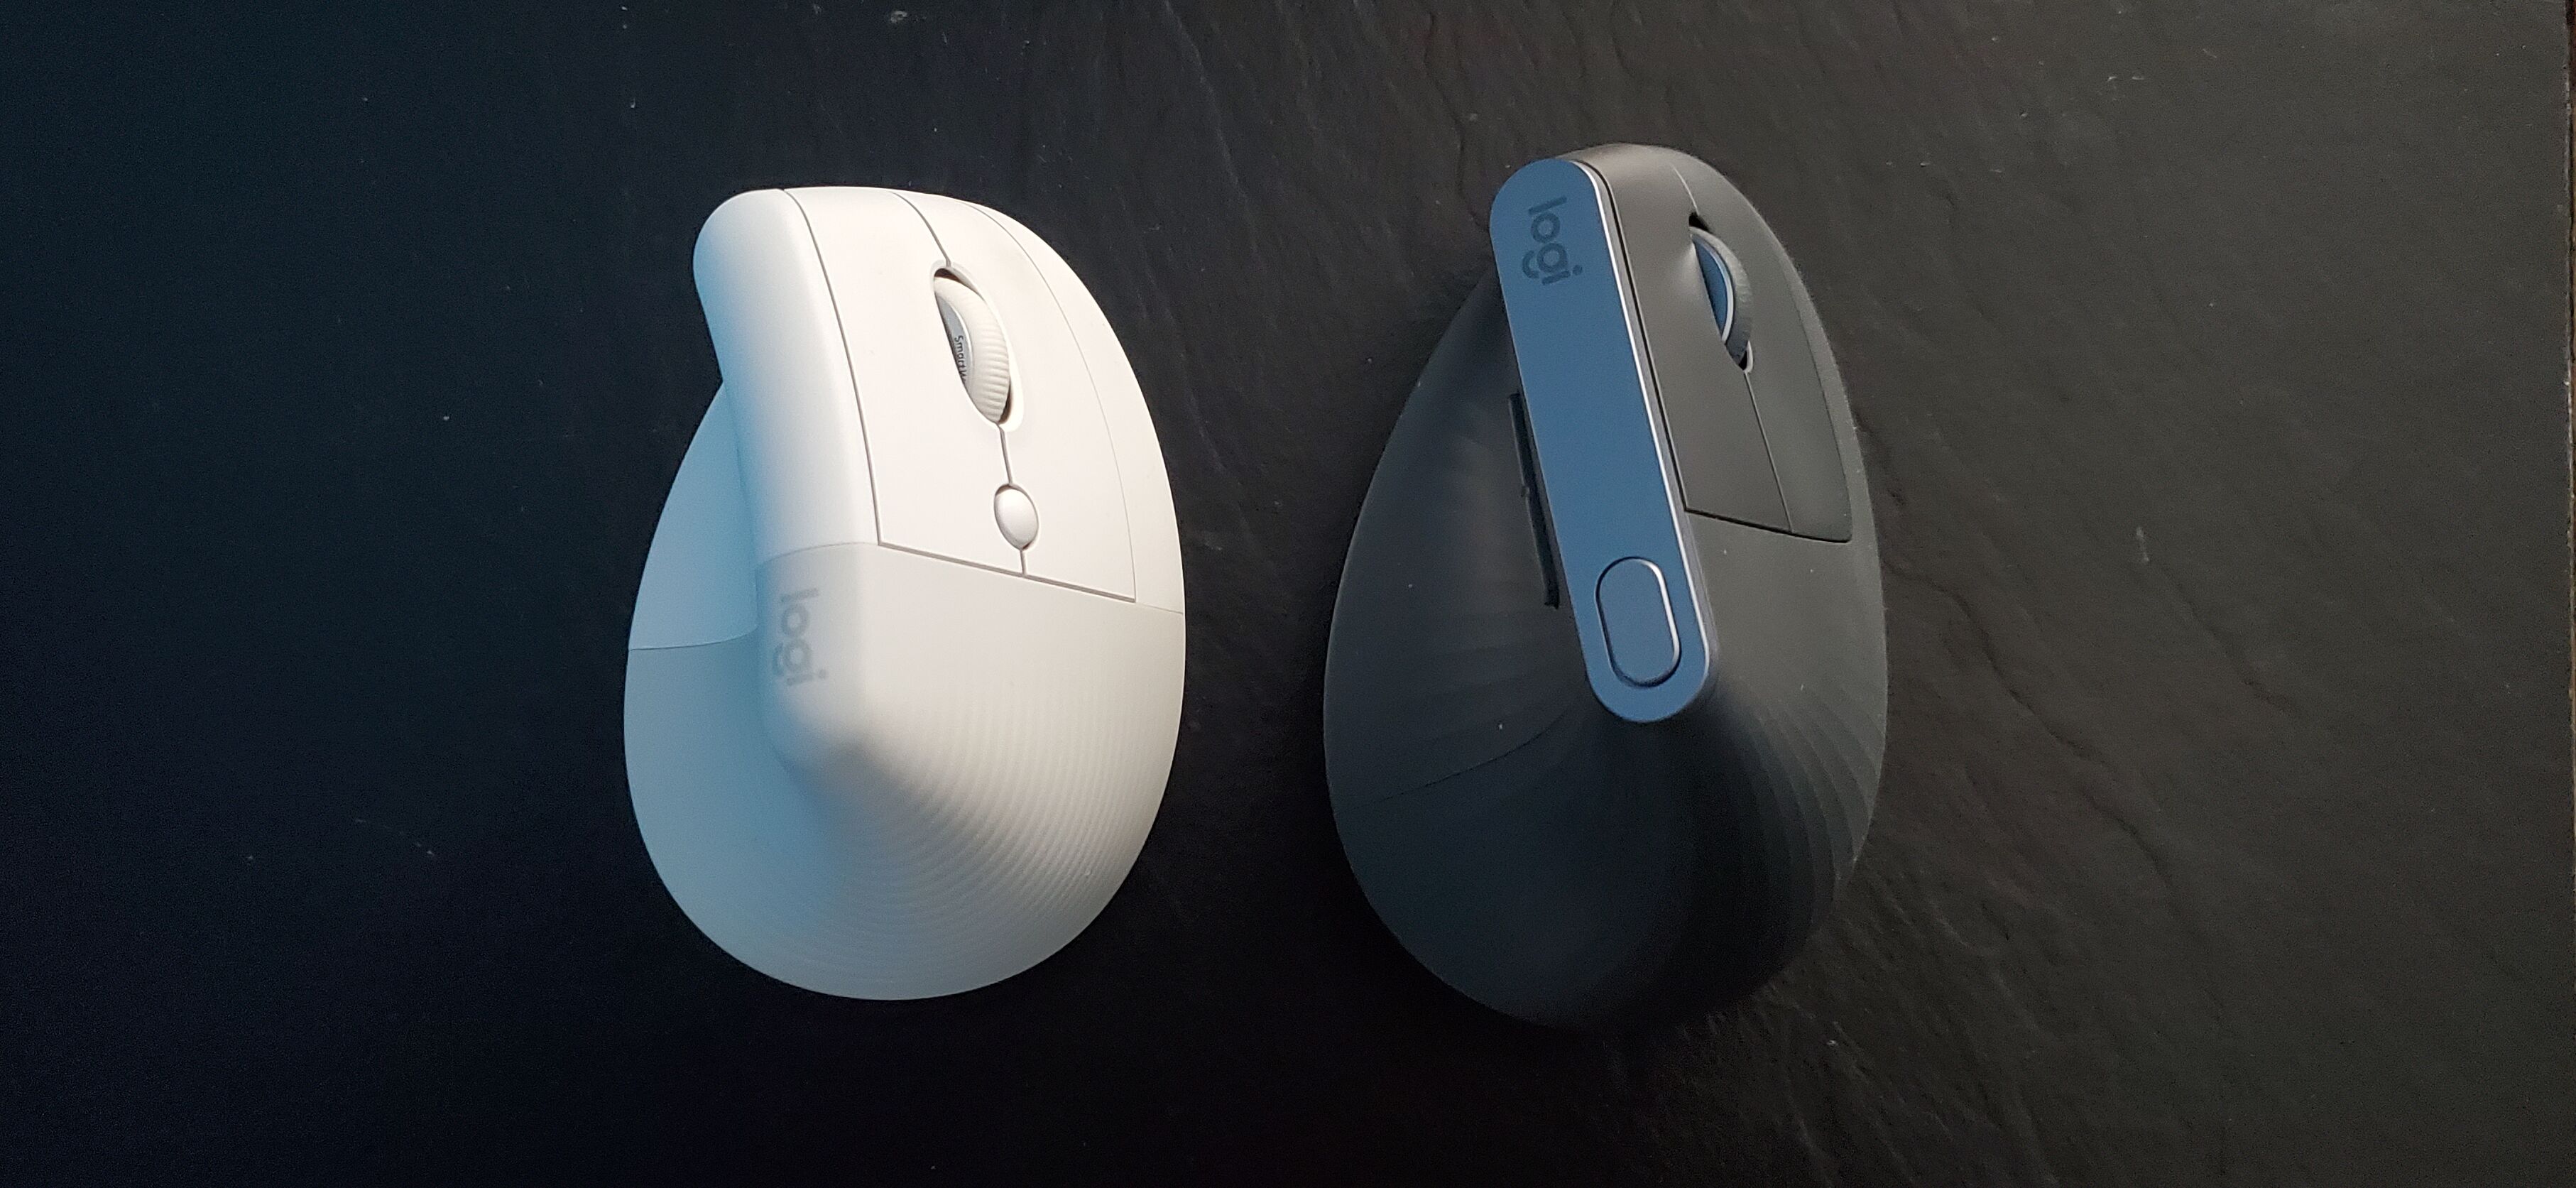 Logitech’s Lift is a vertical mouse that’s easier to grasp | Ars Technica